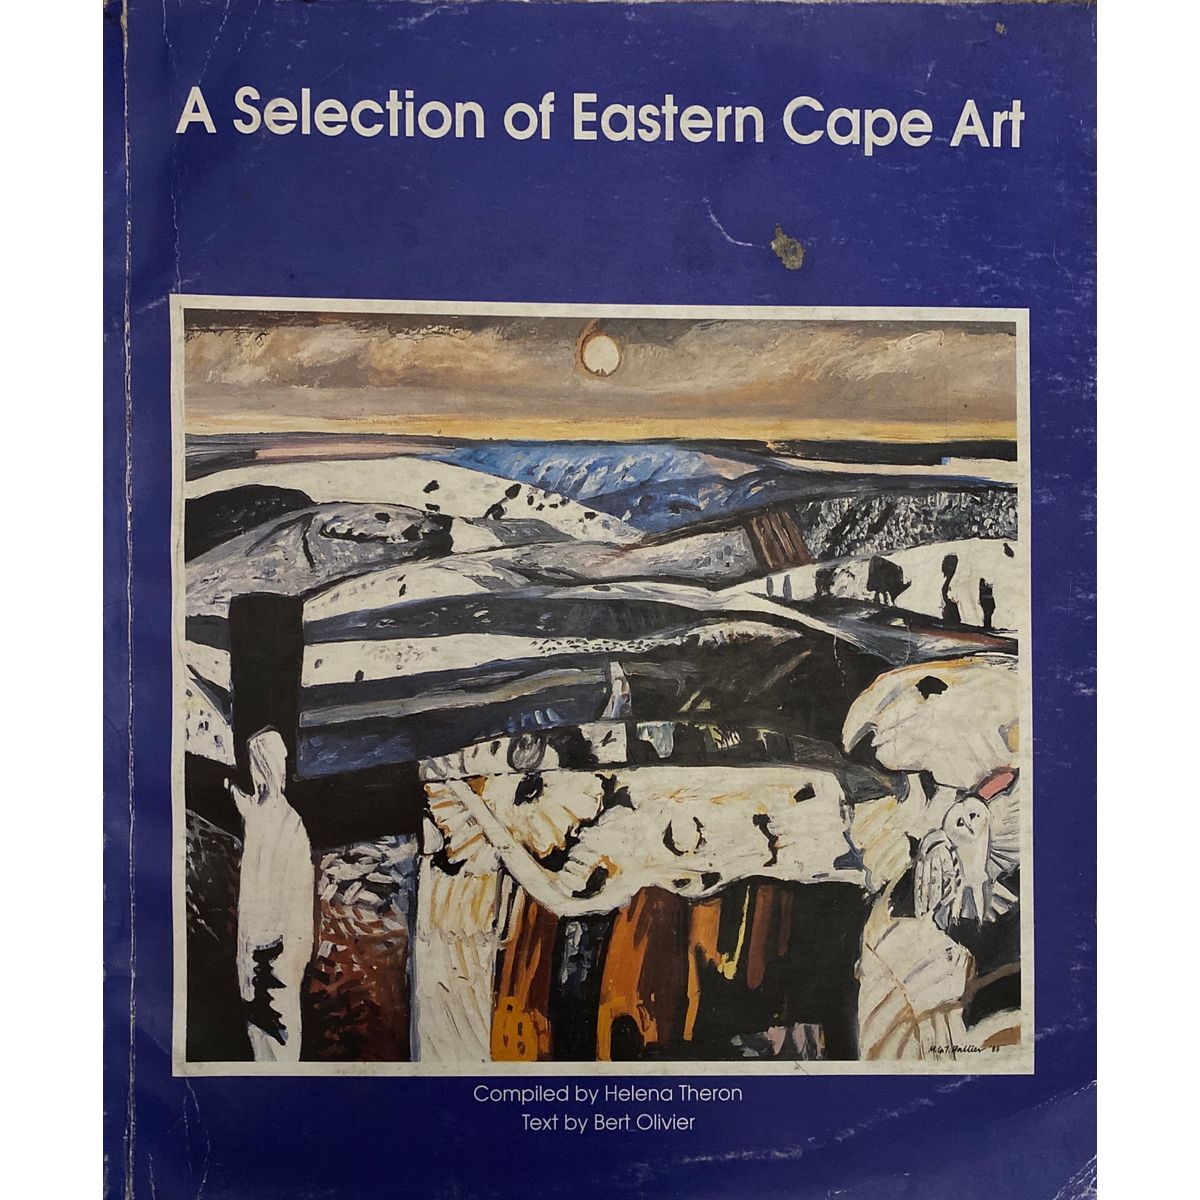 ISBN: 9780620185349 / 0620185341 - A Selection of Eastern Cape Art By Helena Theron and Bert Olivier [1994]